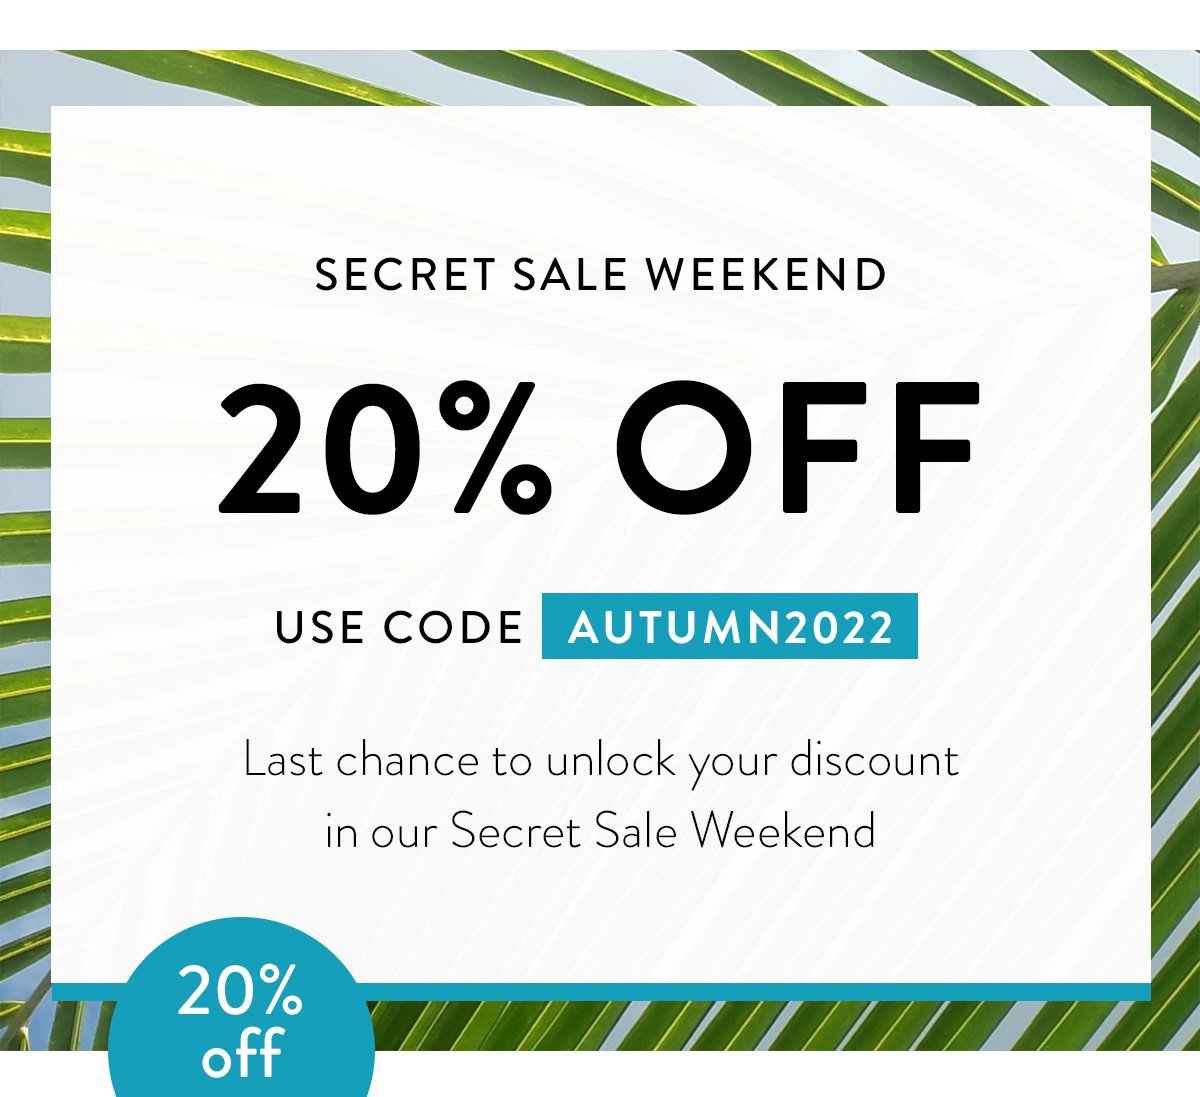 SECRET SALE WEEKEND / 20% OFF / USE CODE AUTUMN2022 / Last chance to unlock your discount in our Secret Sale Weekend